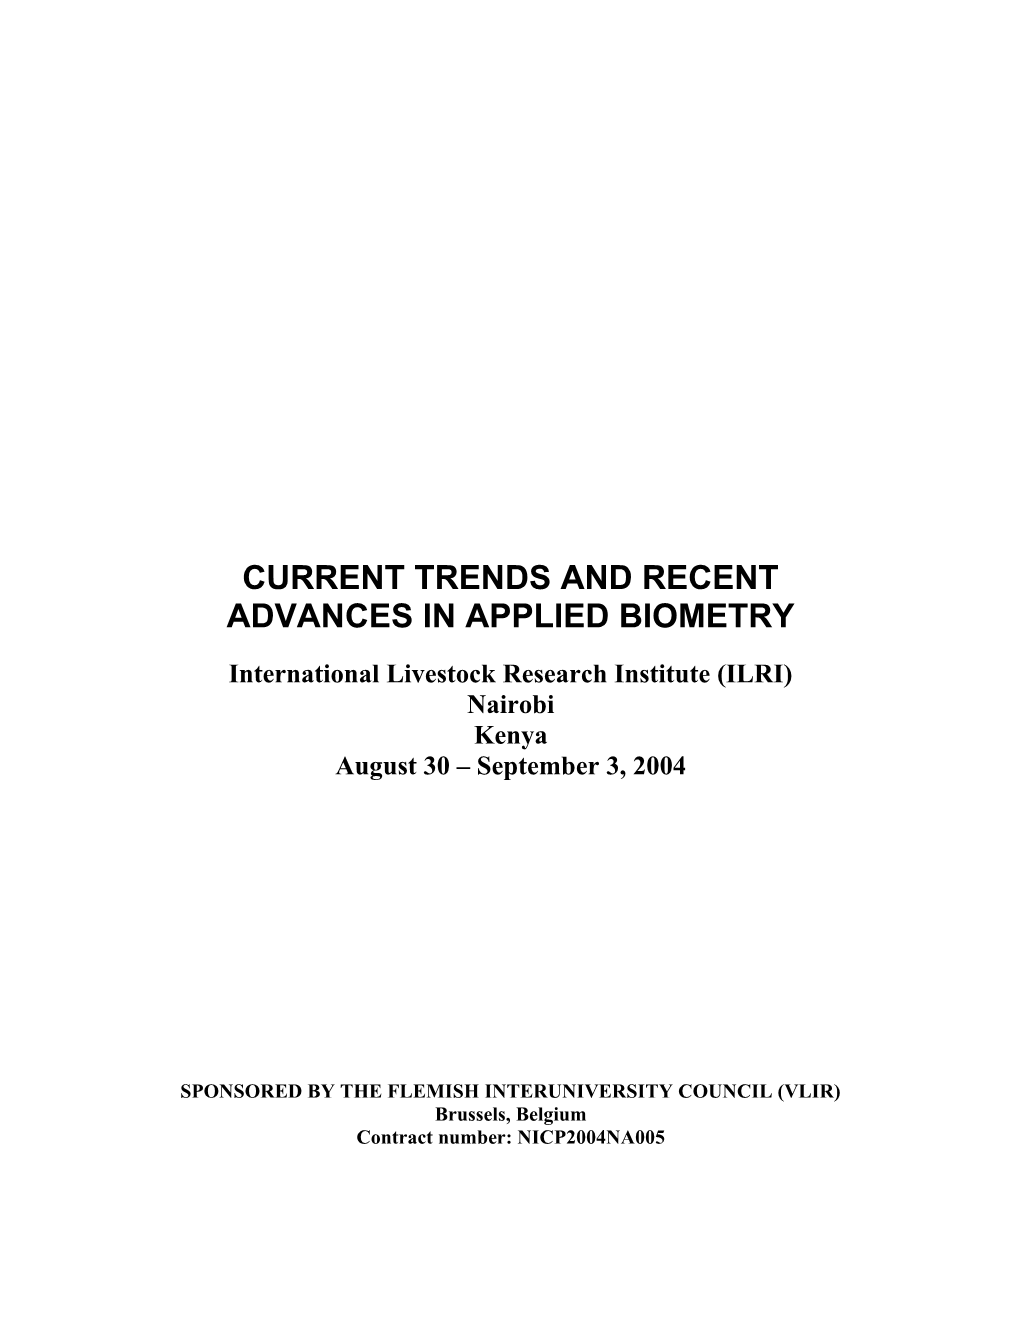 Current Trends and Recent Advances in Applied Biometry